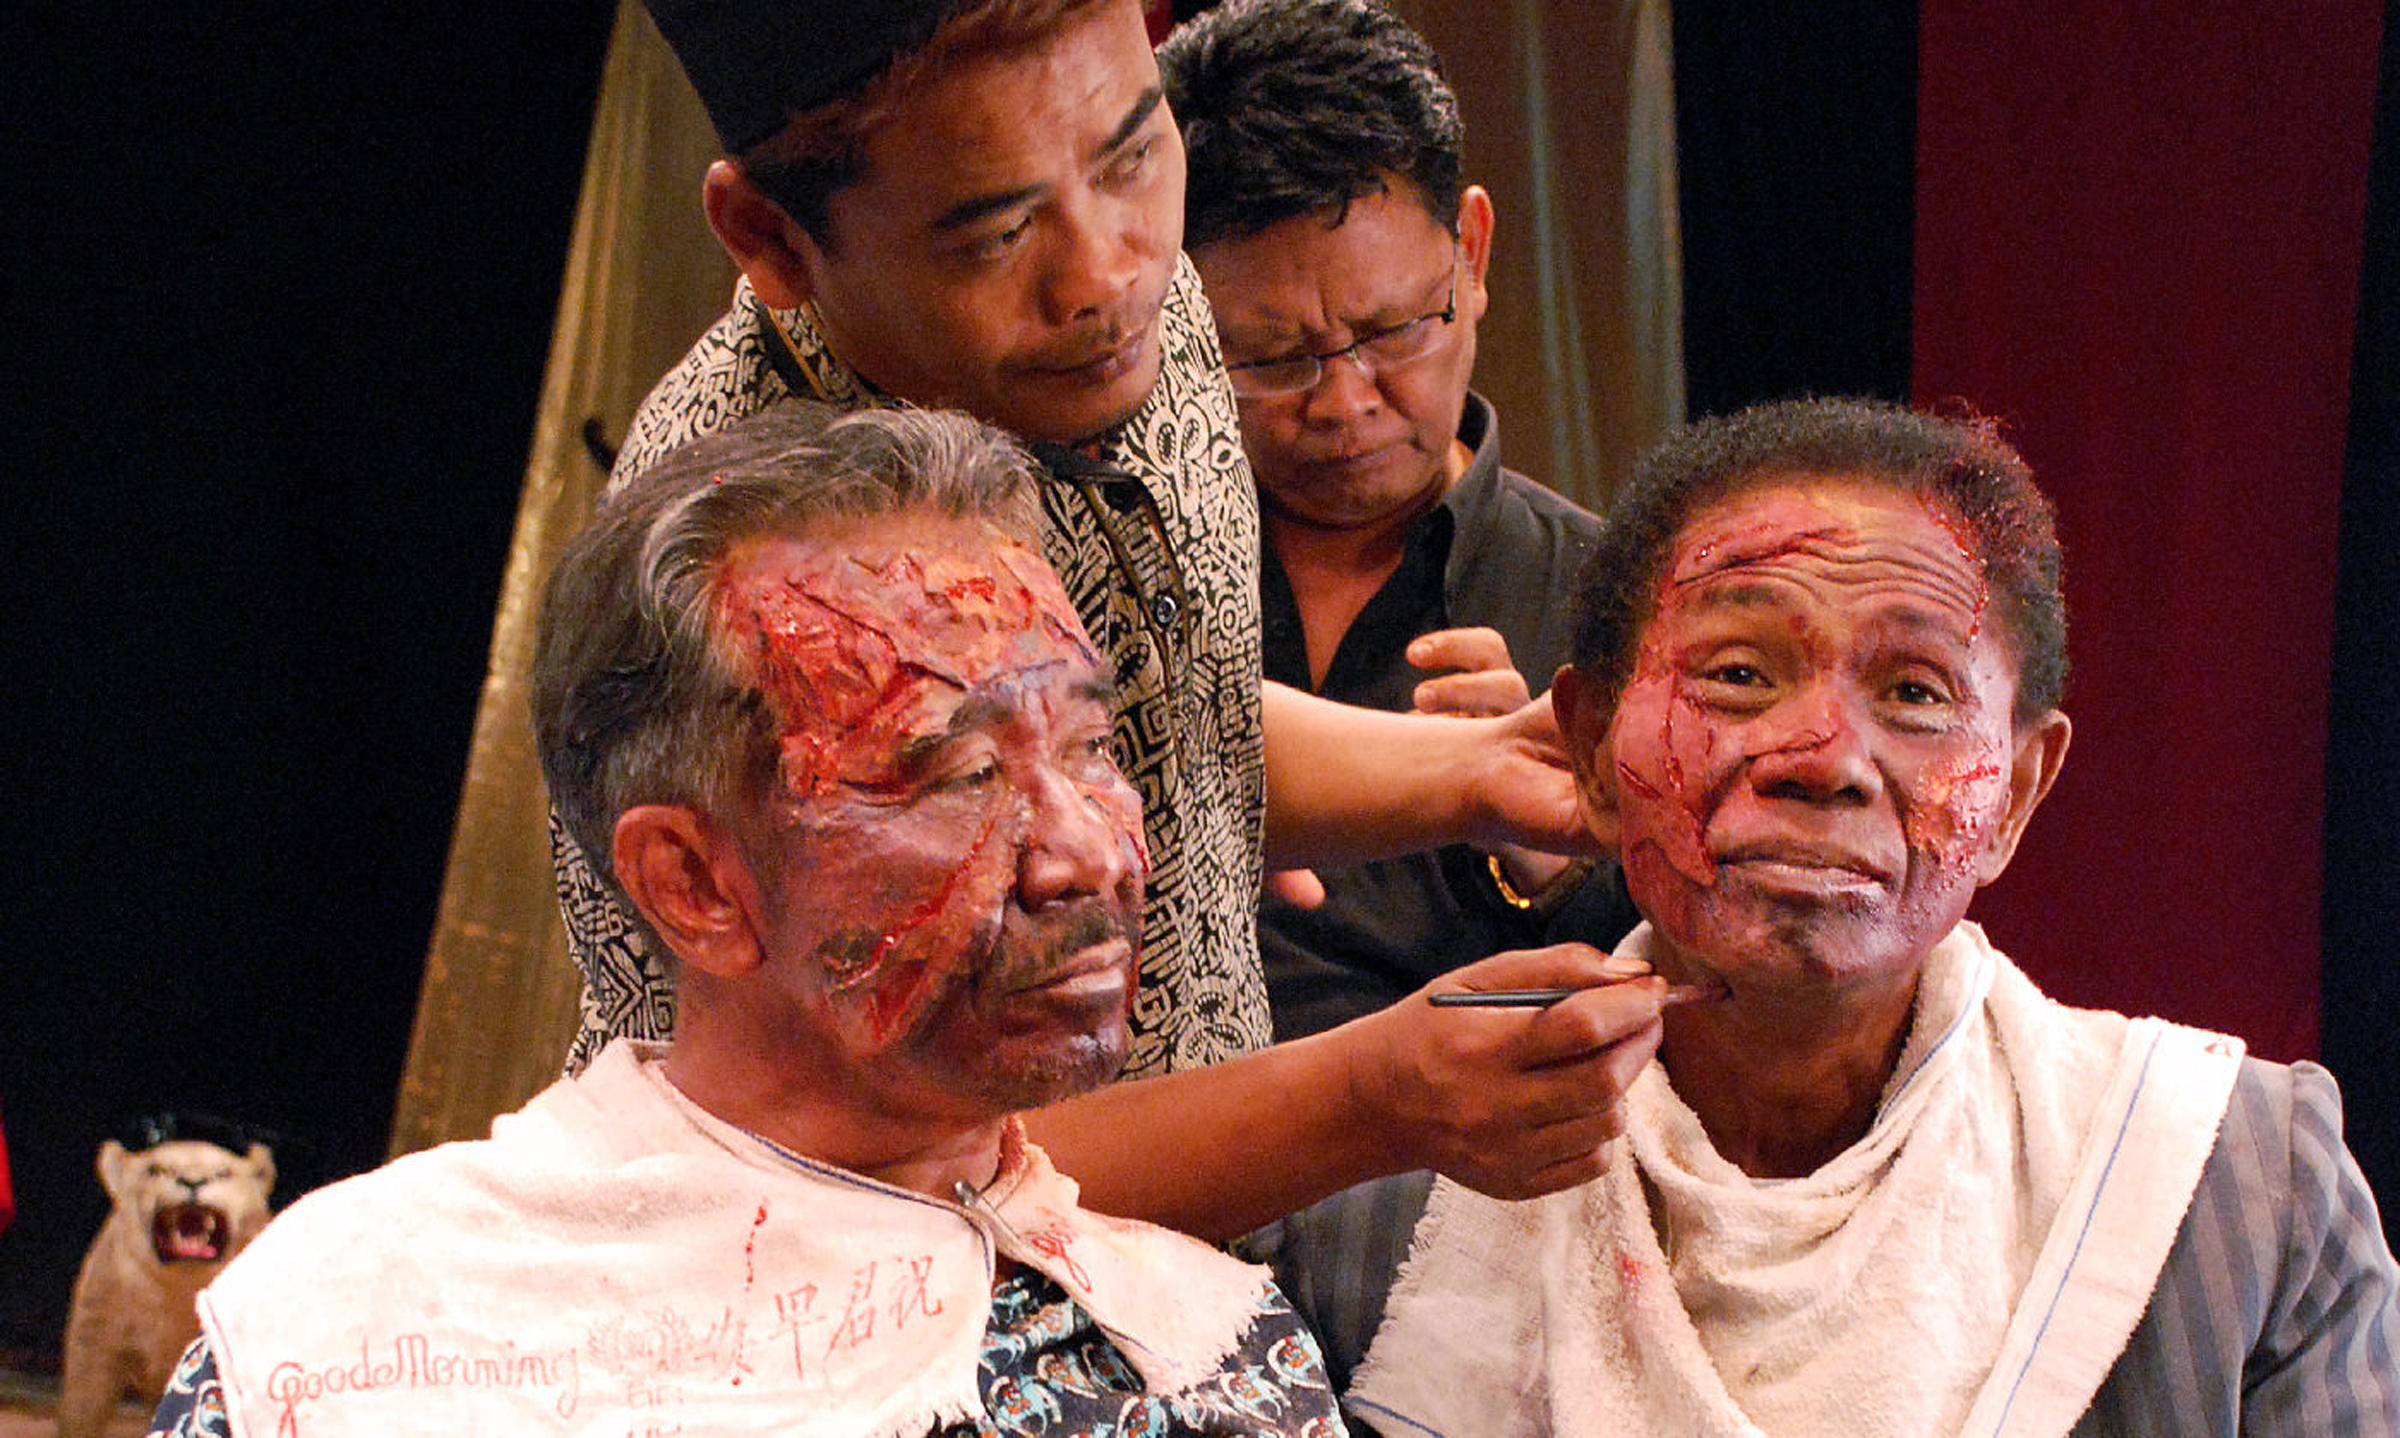 Two Indonesian men undergo special effects make-up on their face